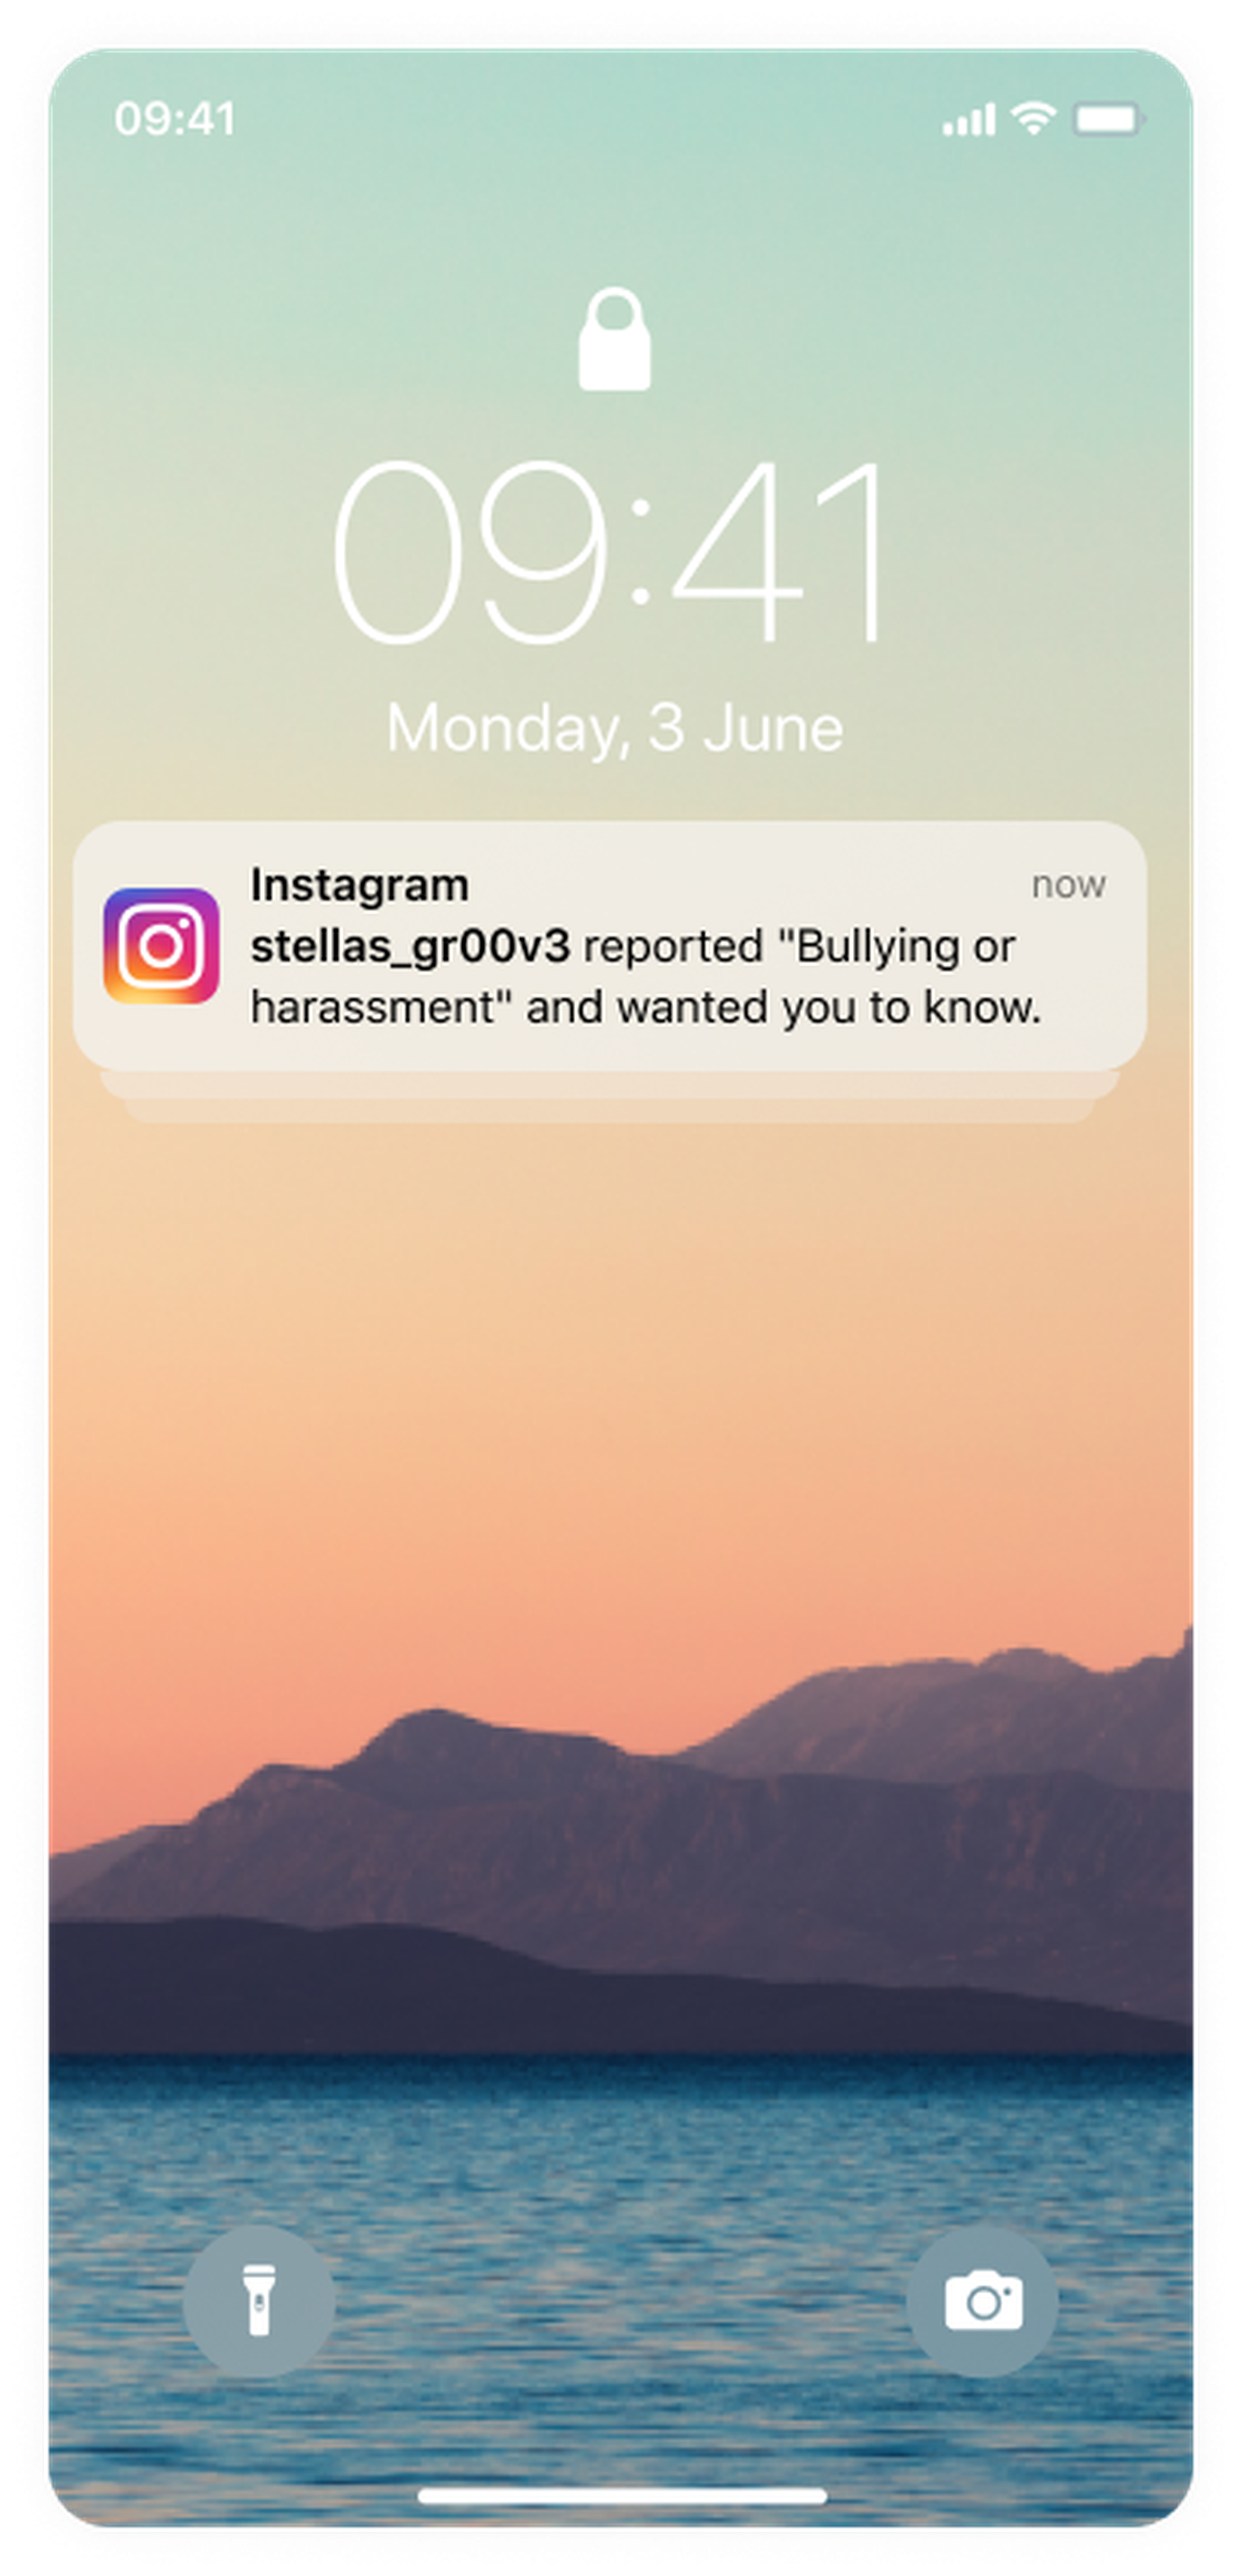 A screenshot of an alert from Instagram demonstrating the new parental supervision tools